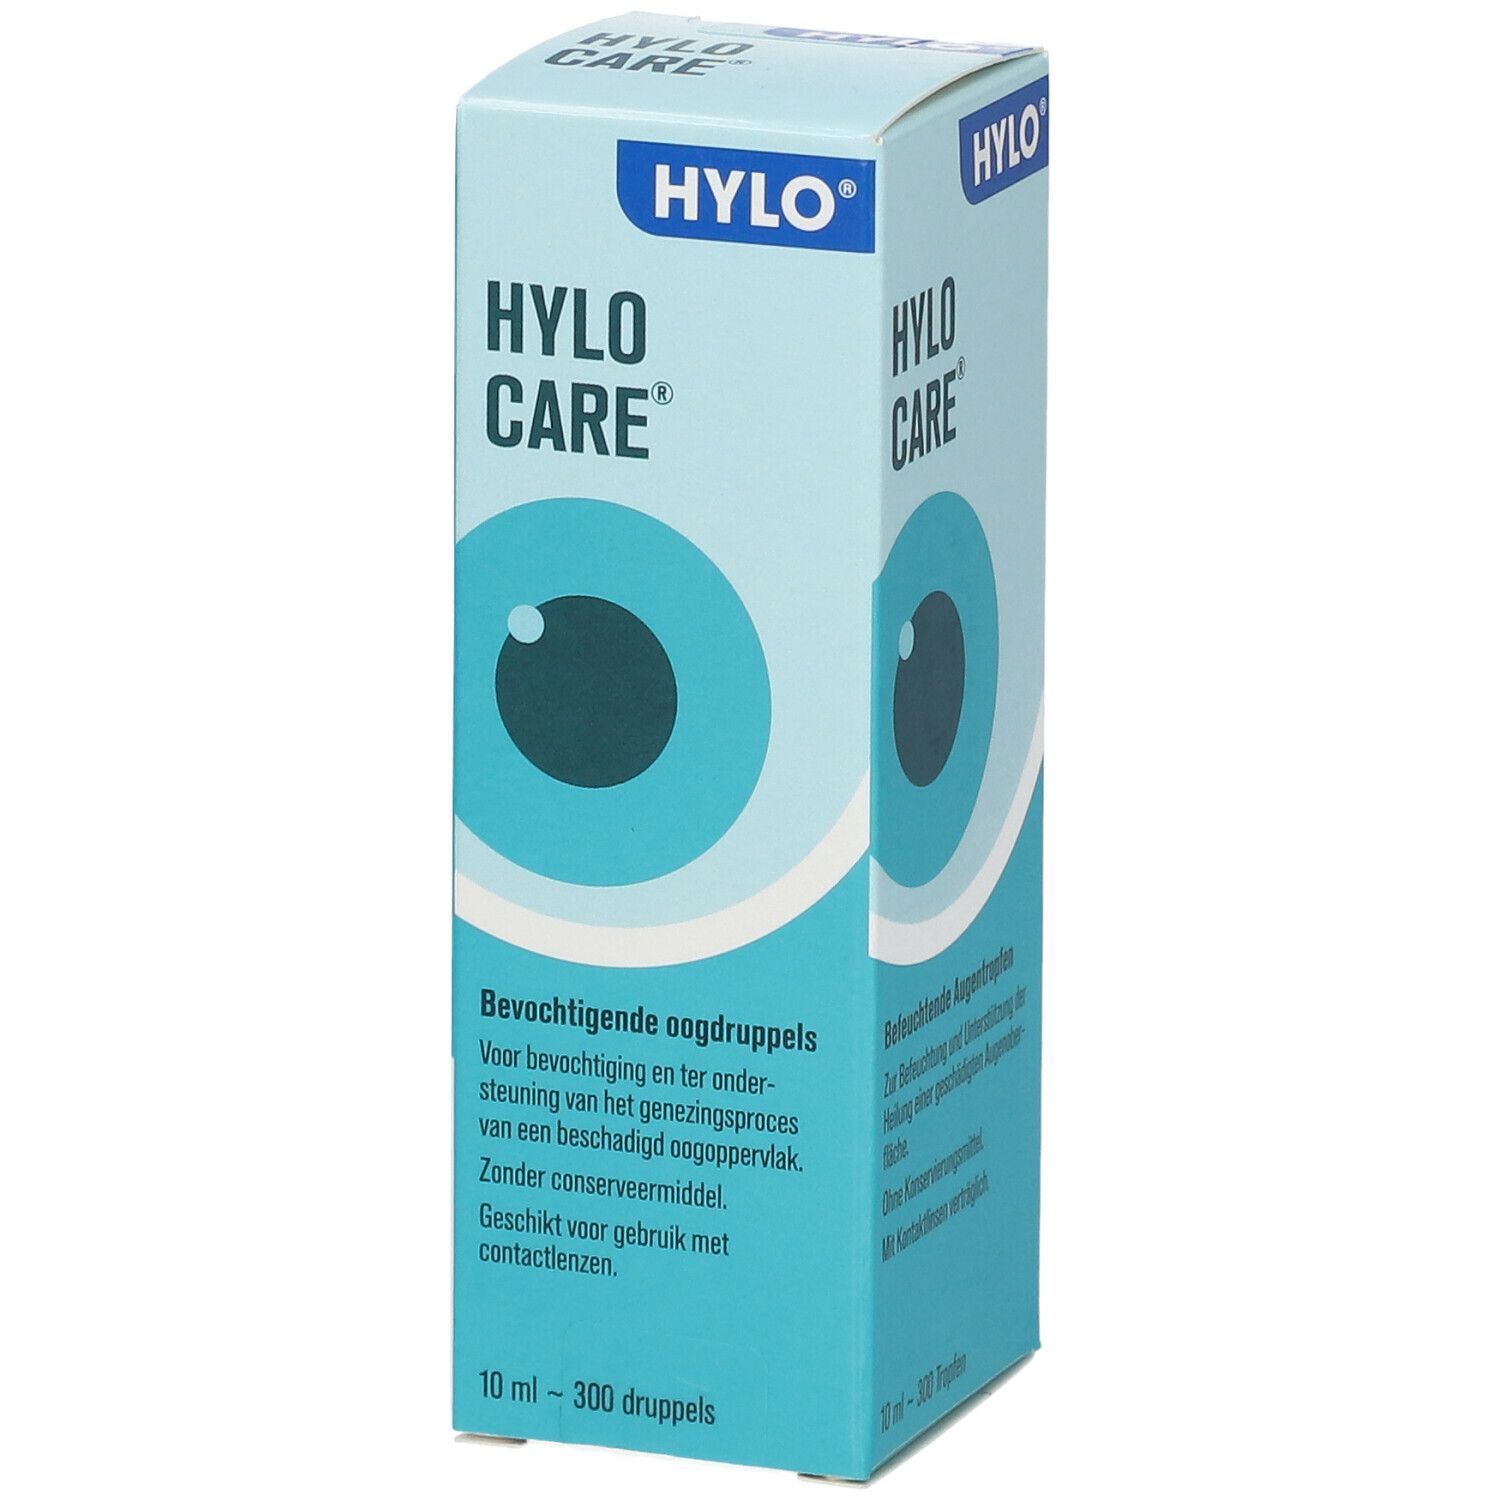 Hylo-Care Gouttes Oculaires Hydratant